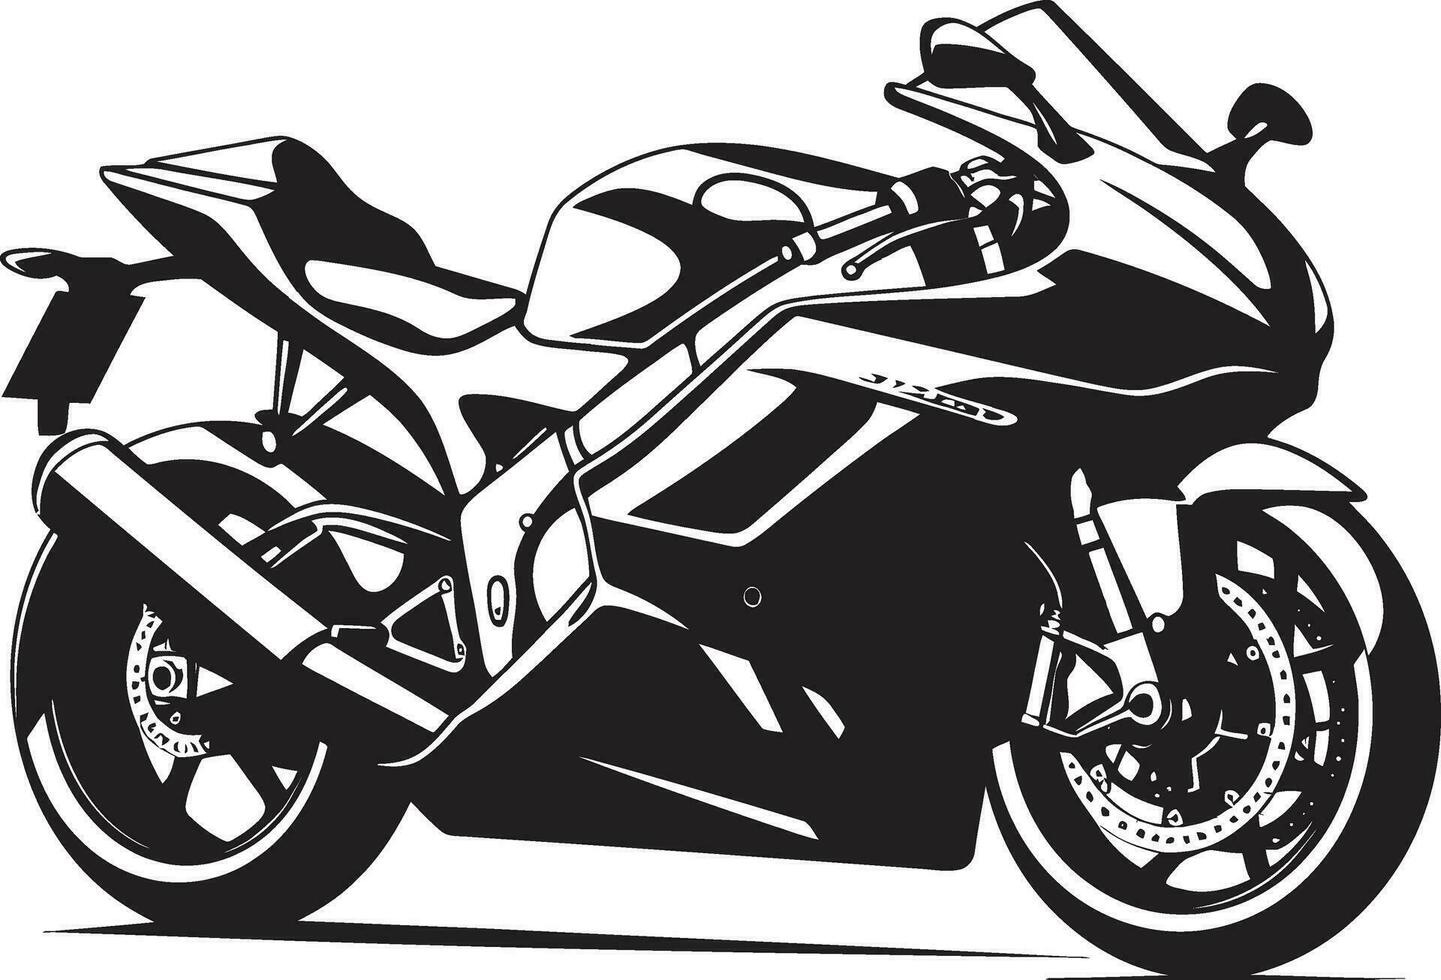 Sprinting in Style Sports Bike Vector Art Ride the Lines of Speed Sports Bike Vectors